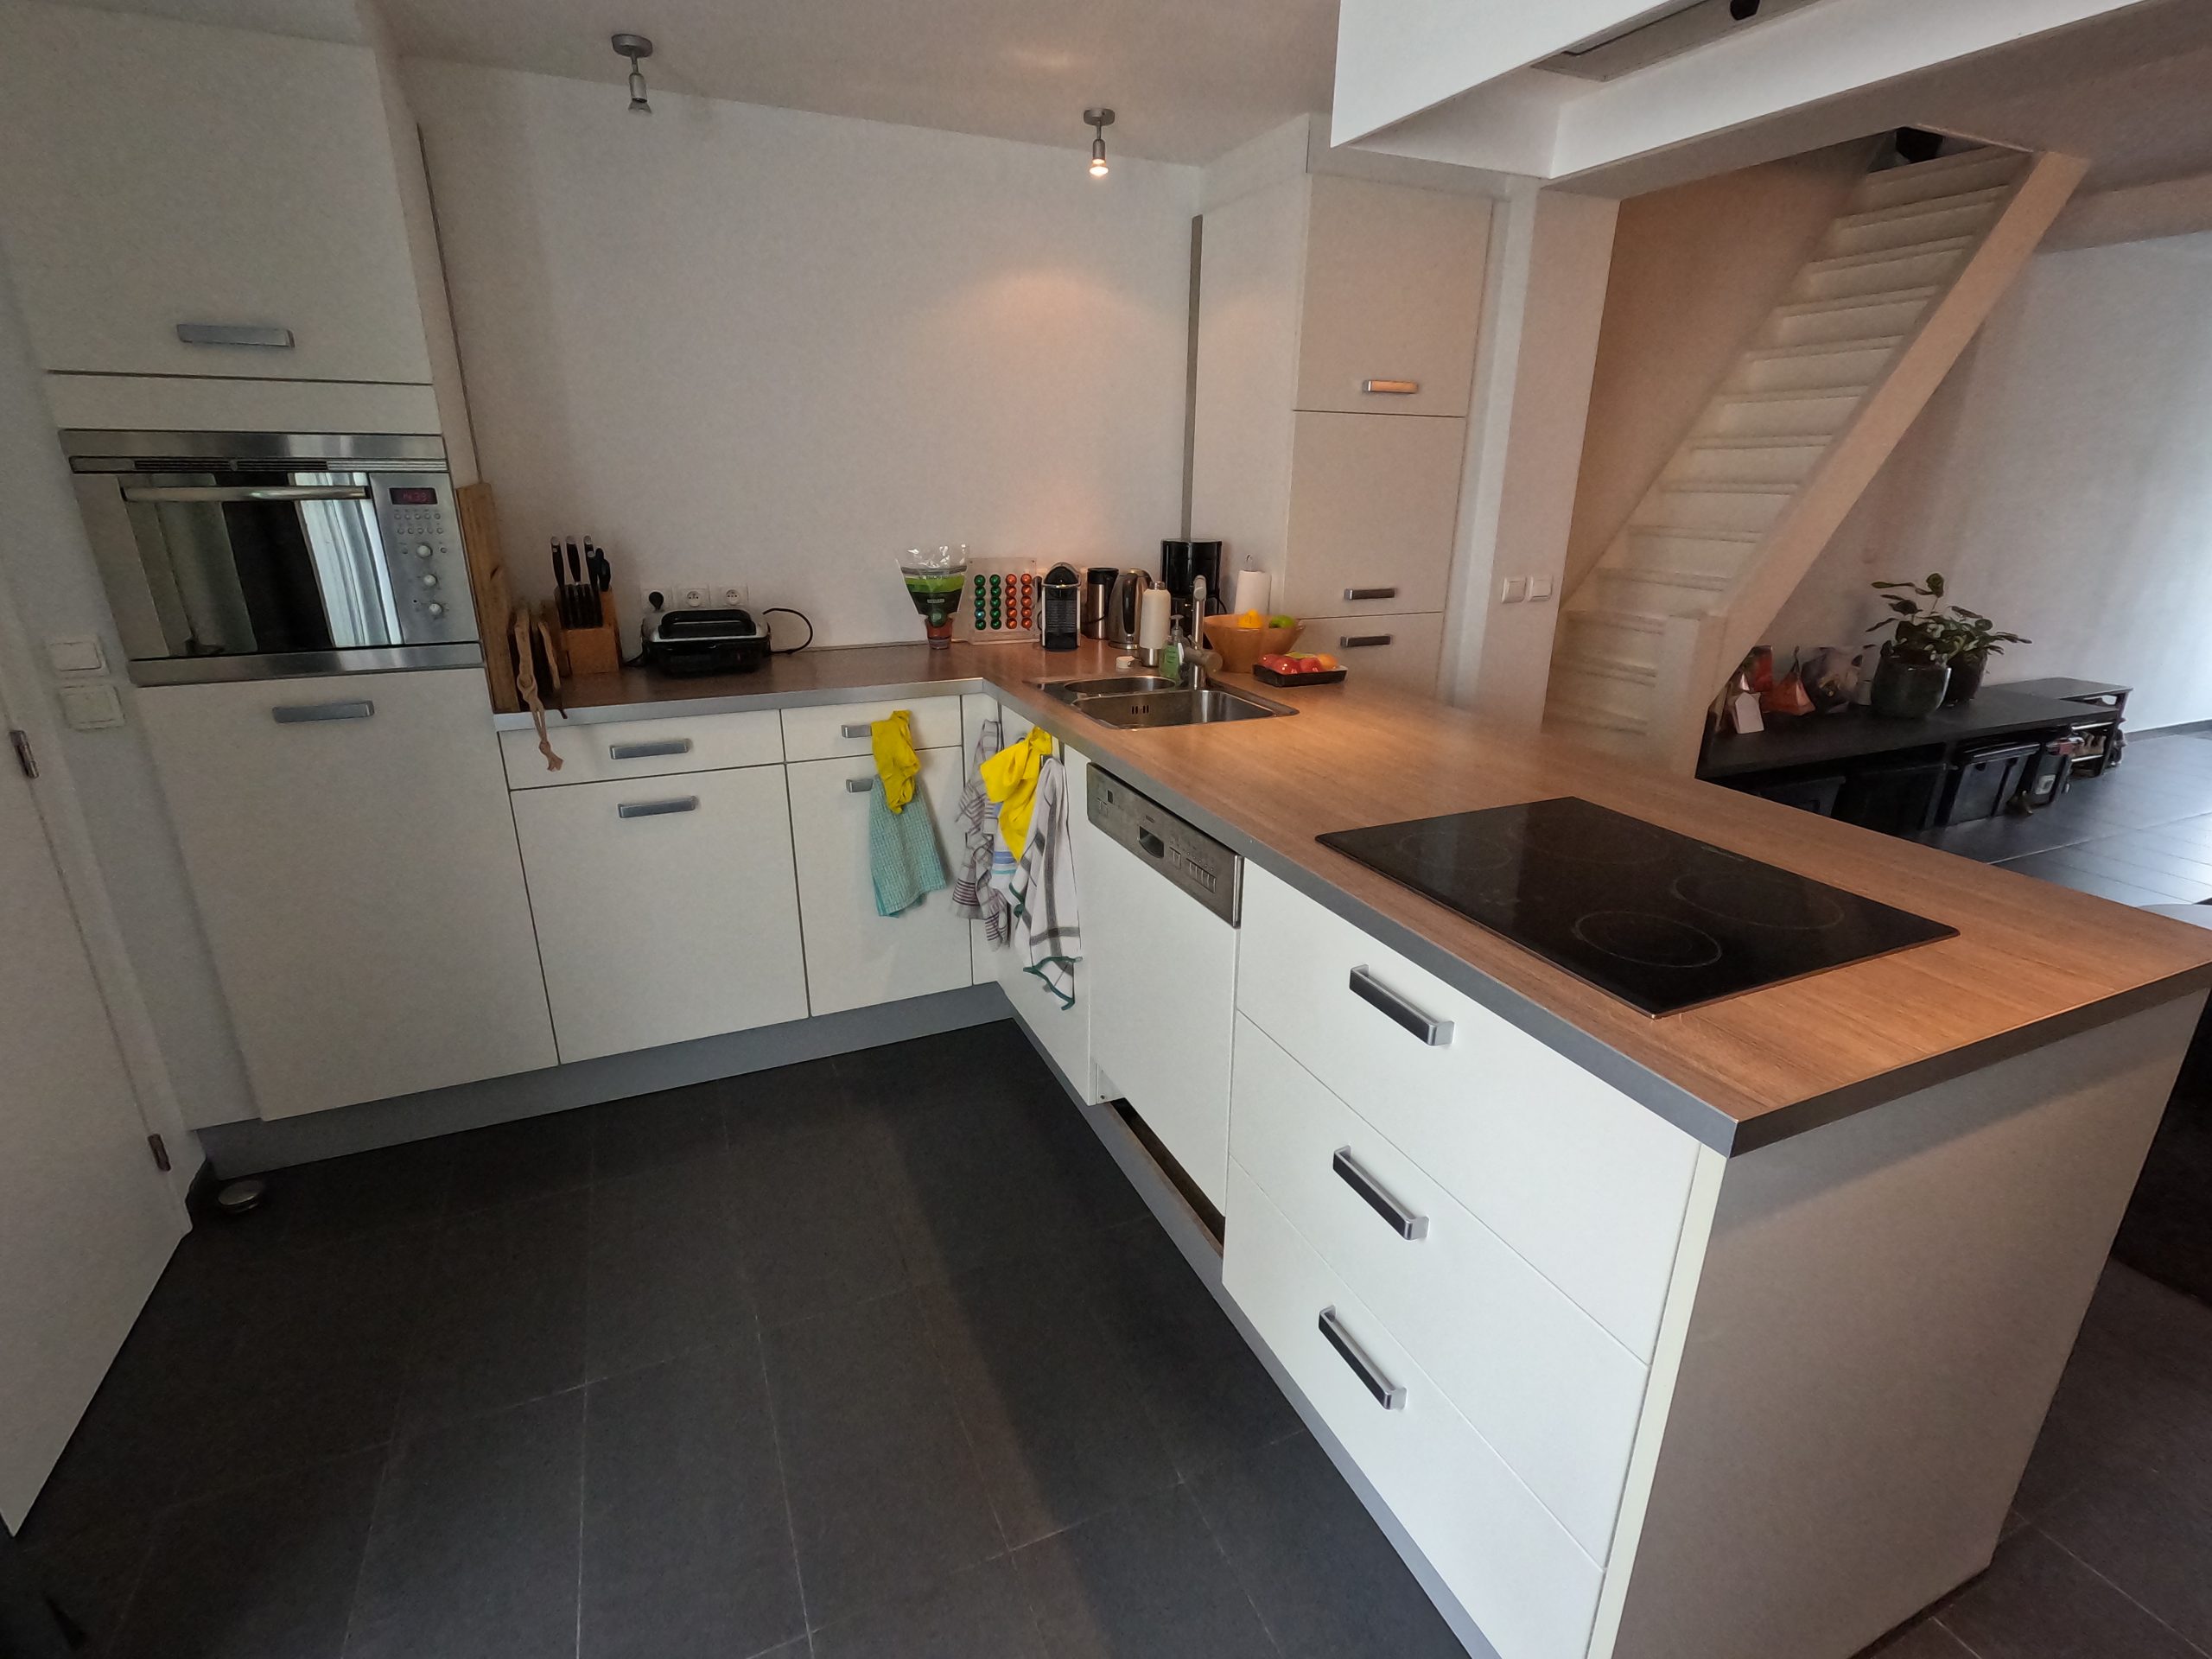 house for rent in ghent - kitchen